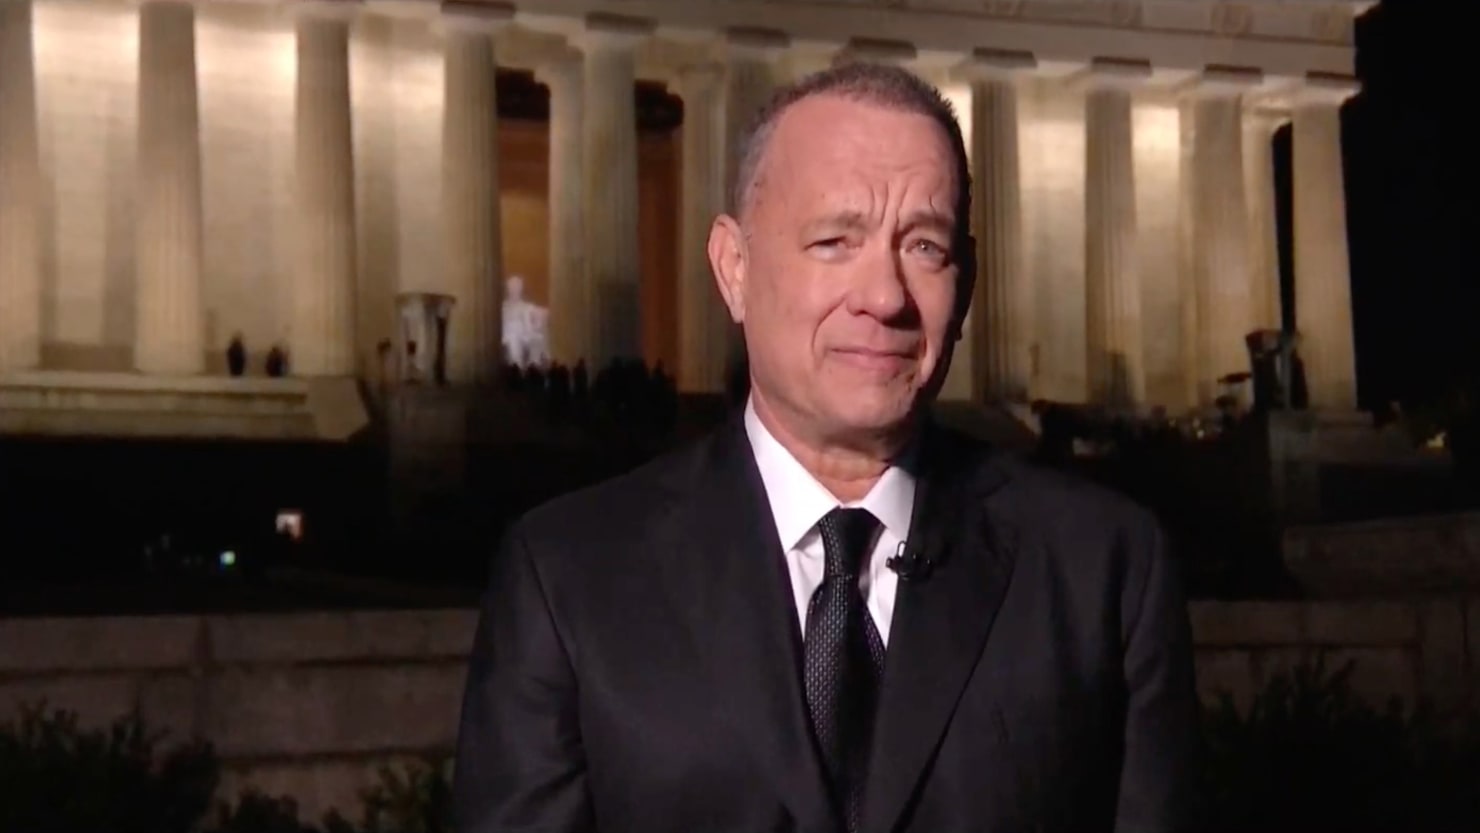 Joe Biden, Tom Hanks and Bruce Springsteen’s ‘Celebrating America’ Inaugural Event Was So Cheesy and Healing